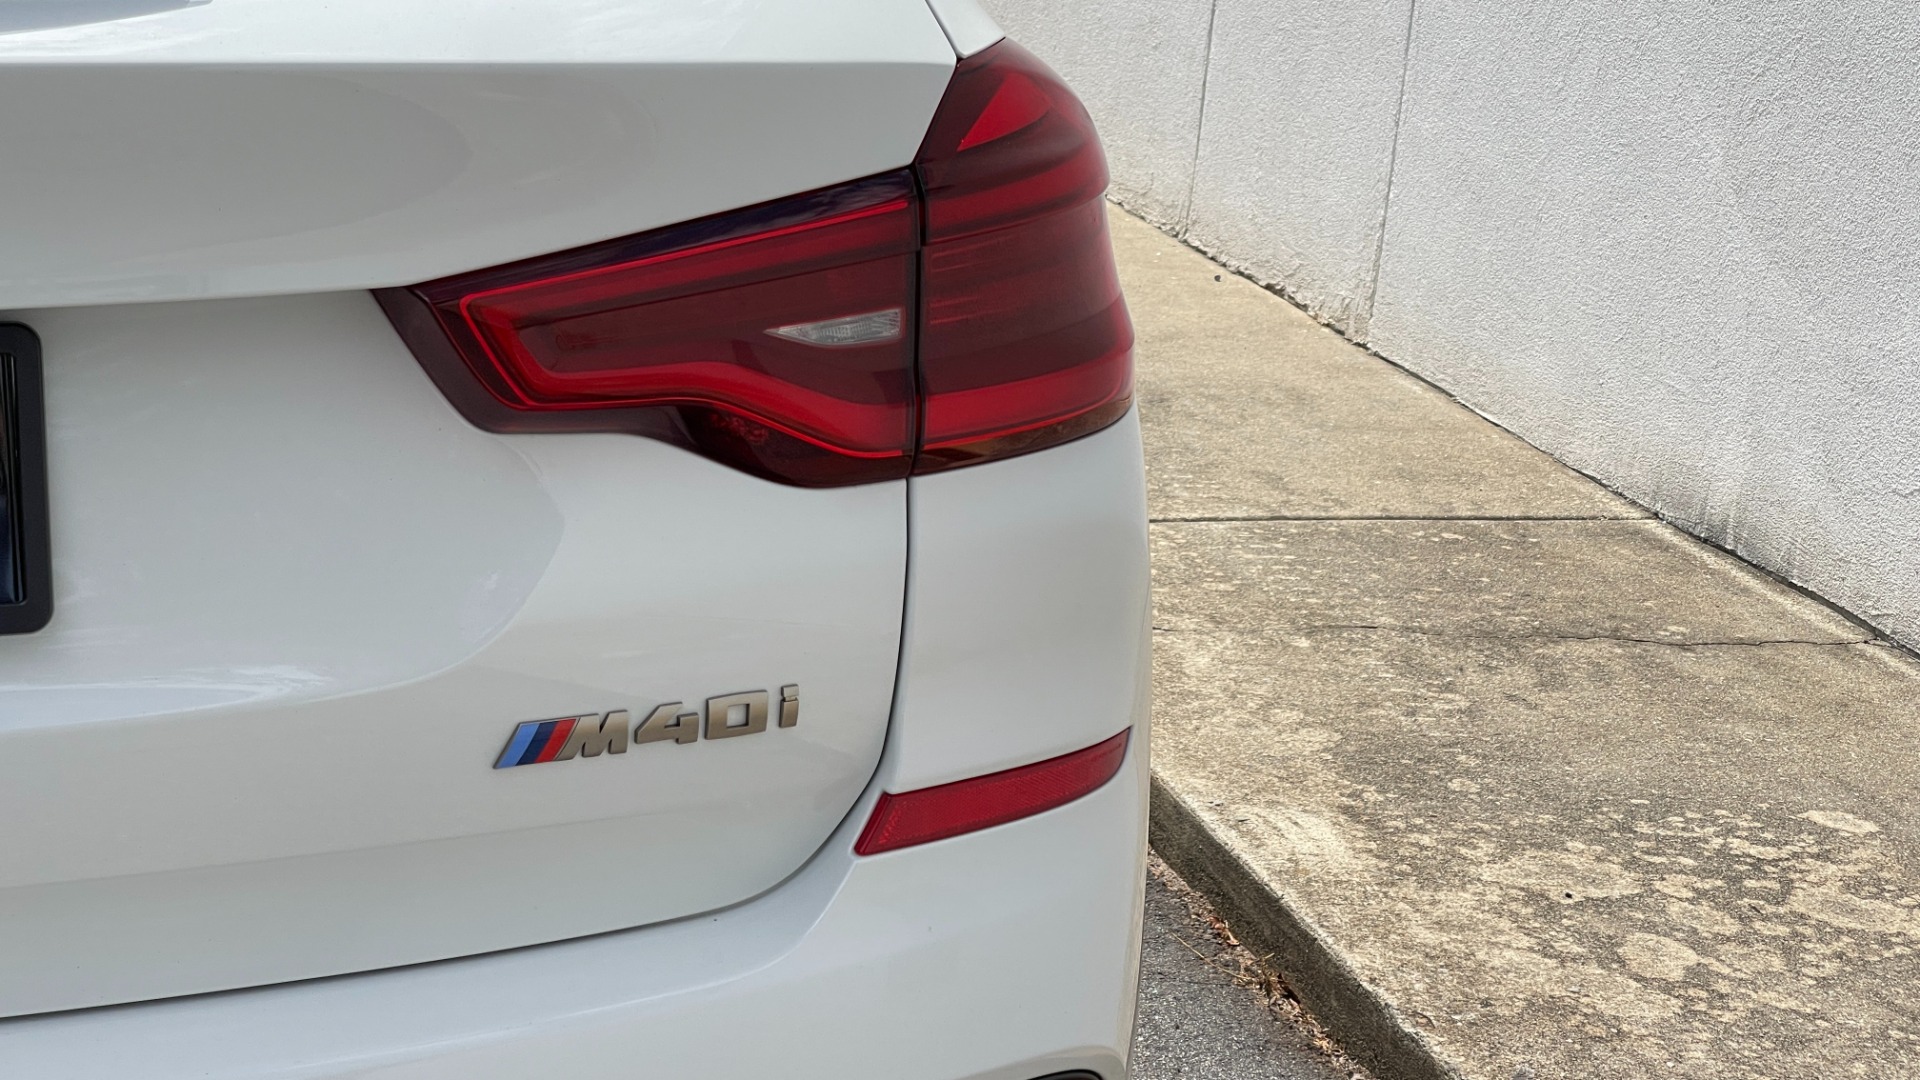 Used 2021 BMW X3 M40i / EXECUTIVE PACKAGE / SHADOWLINE TRIM / HEADS UP DISPLAY / AMBIENT LIG for sale $58,995 at Formula Imports in Charlotte NC 28227 19